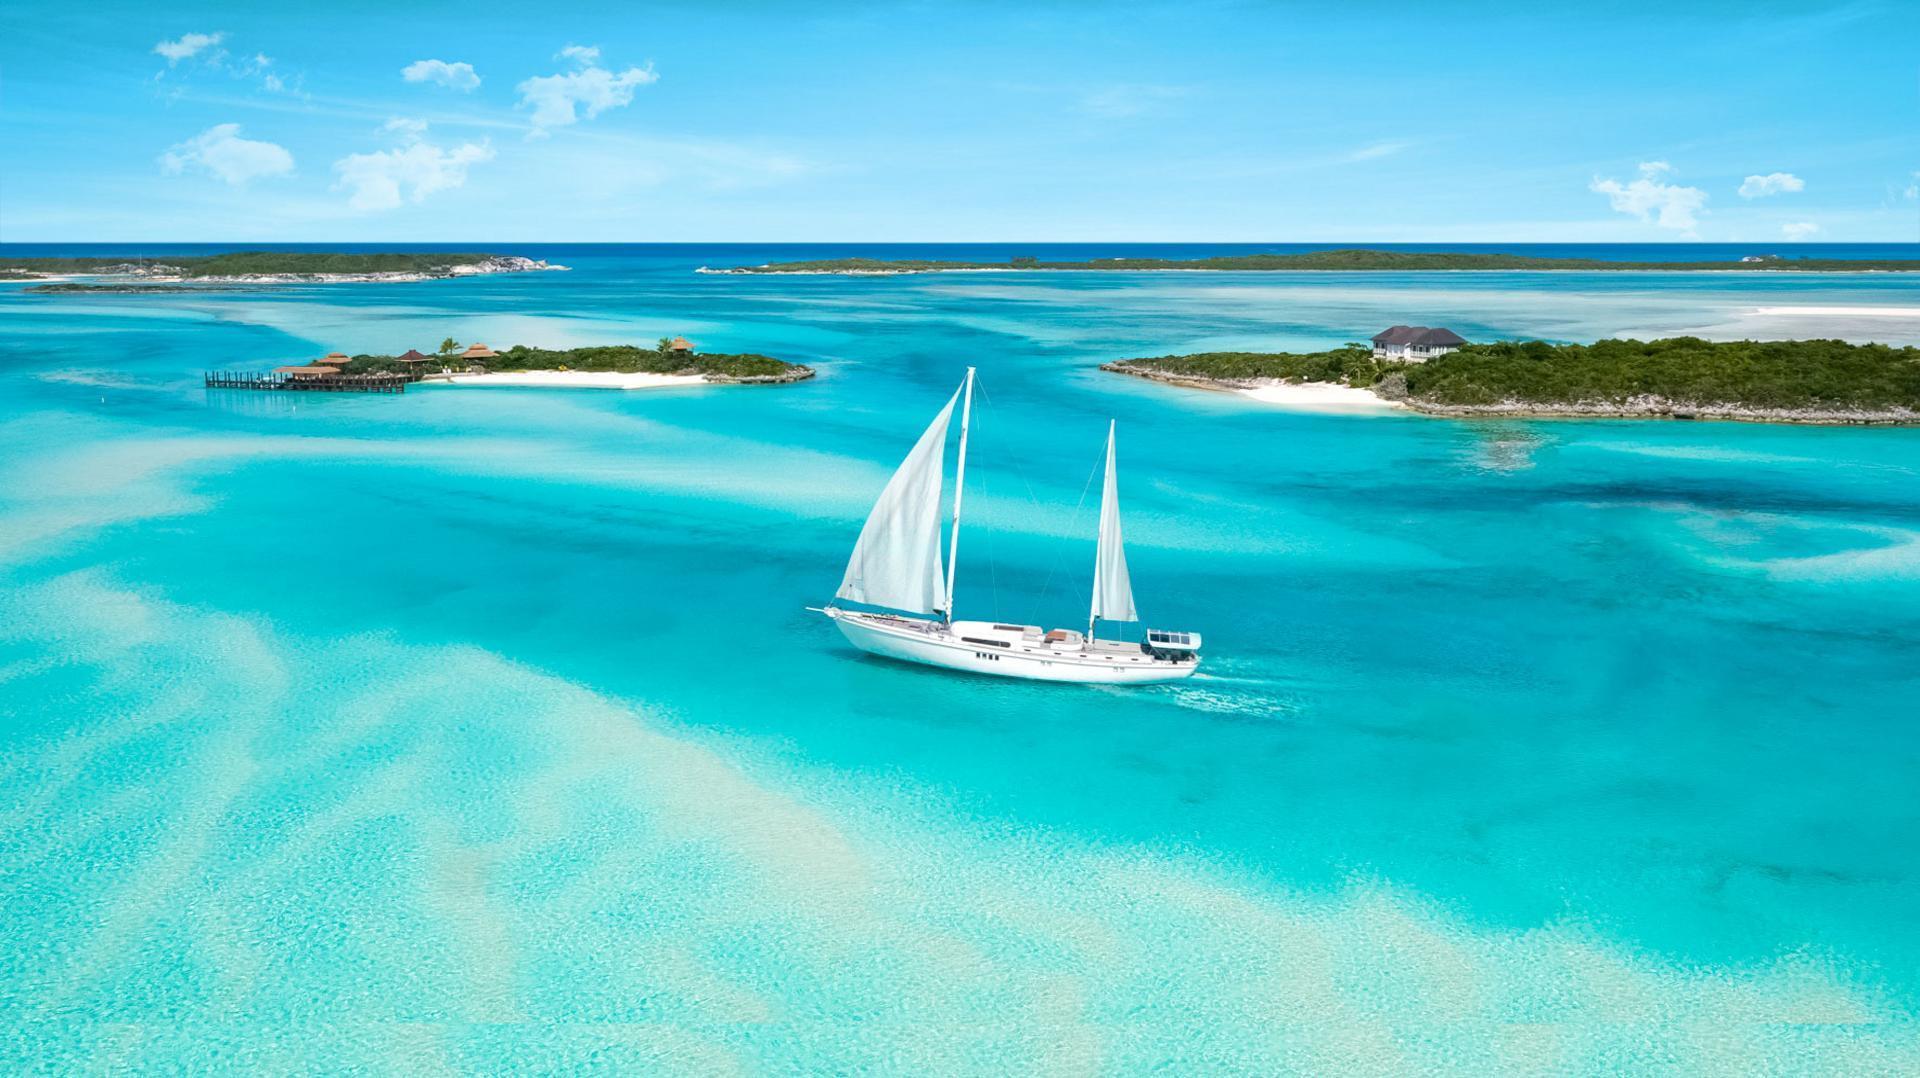 The Islands Of The Bahamas in Nassau, BS